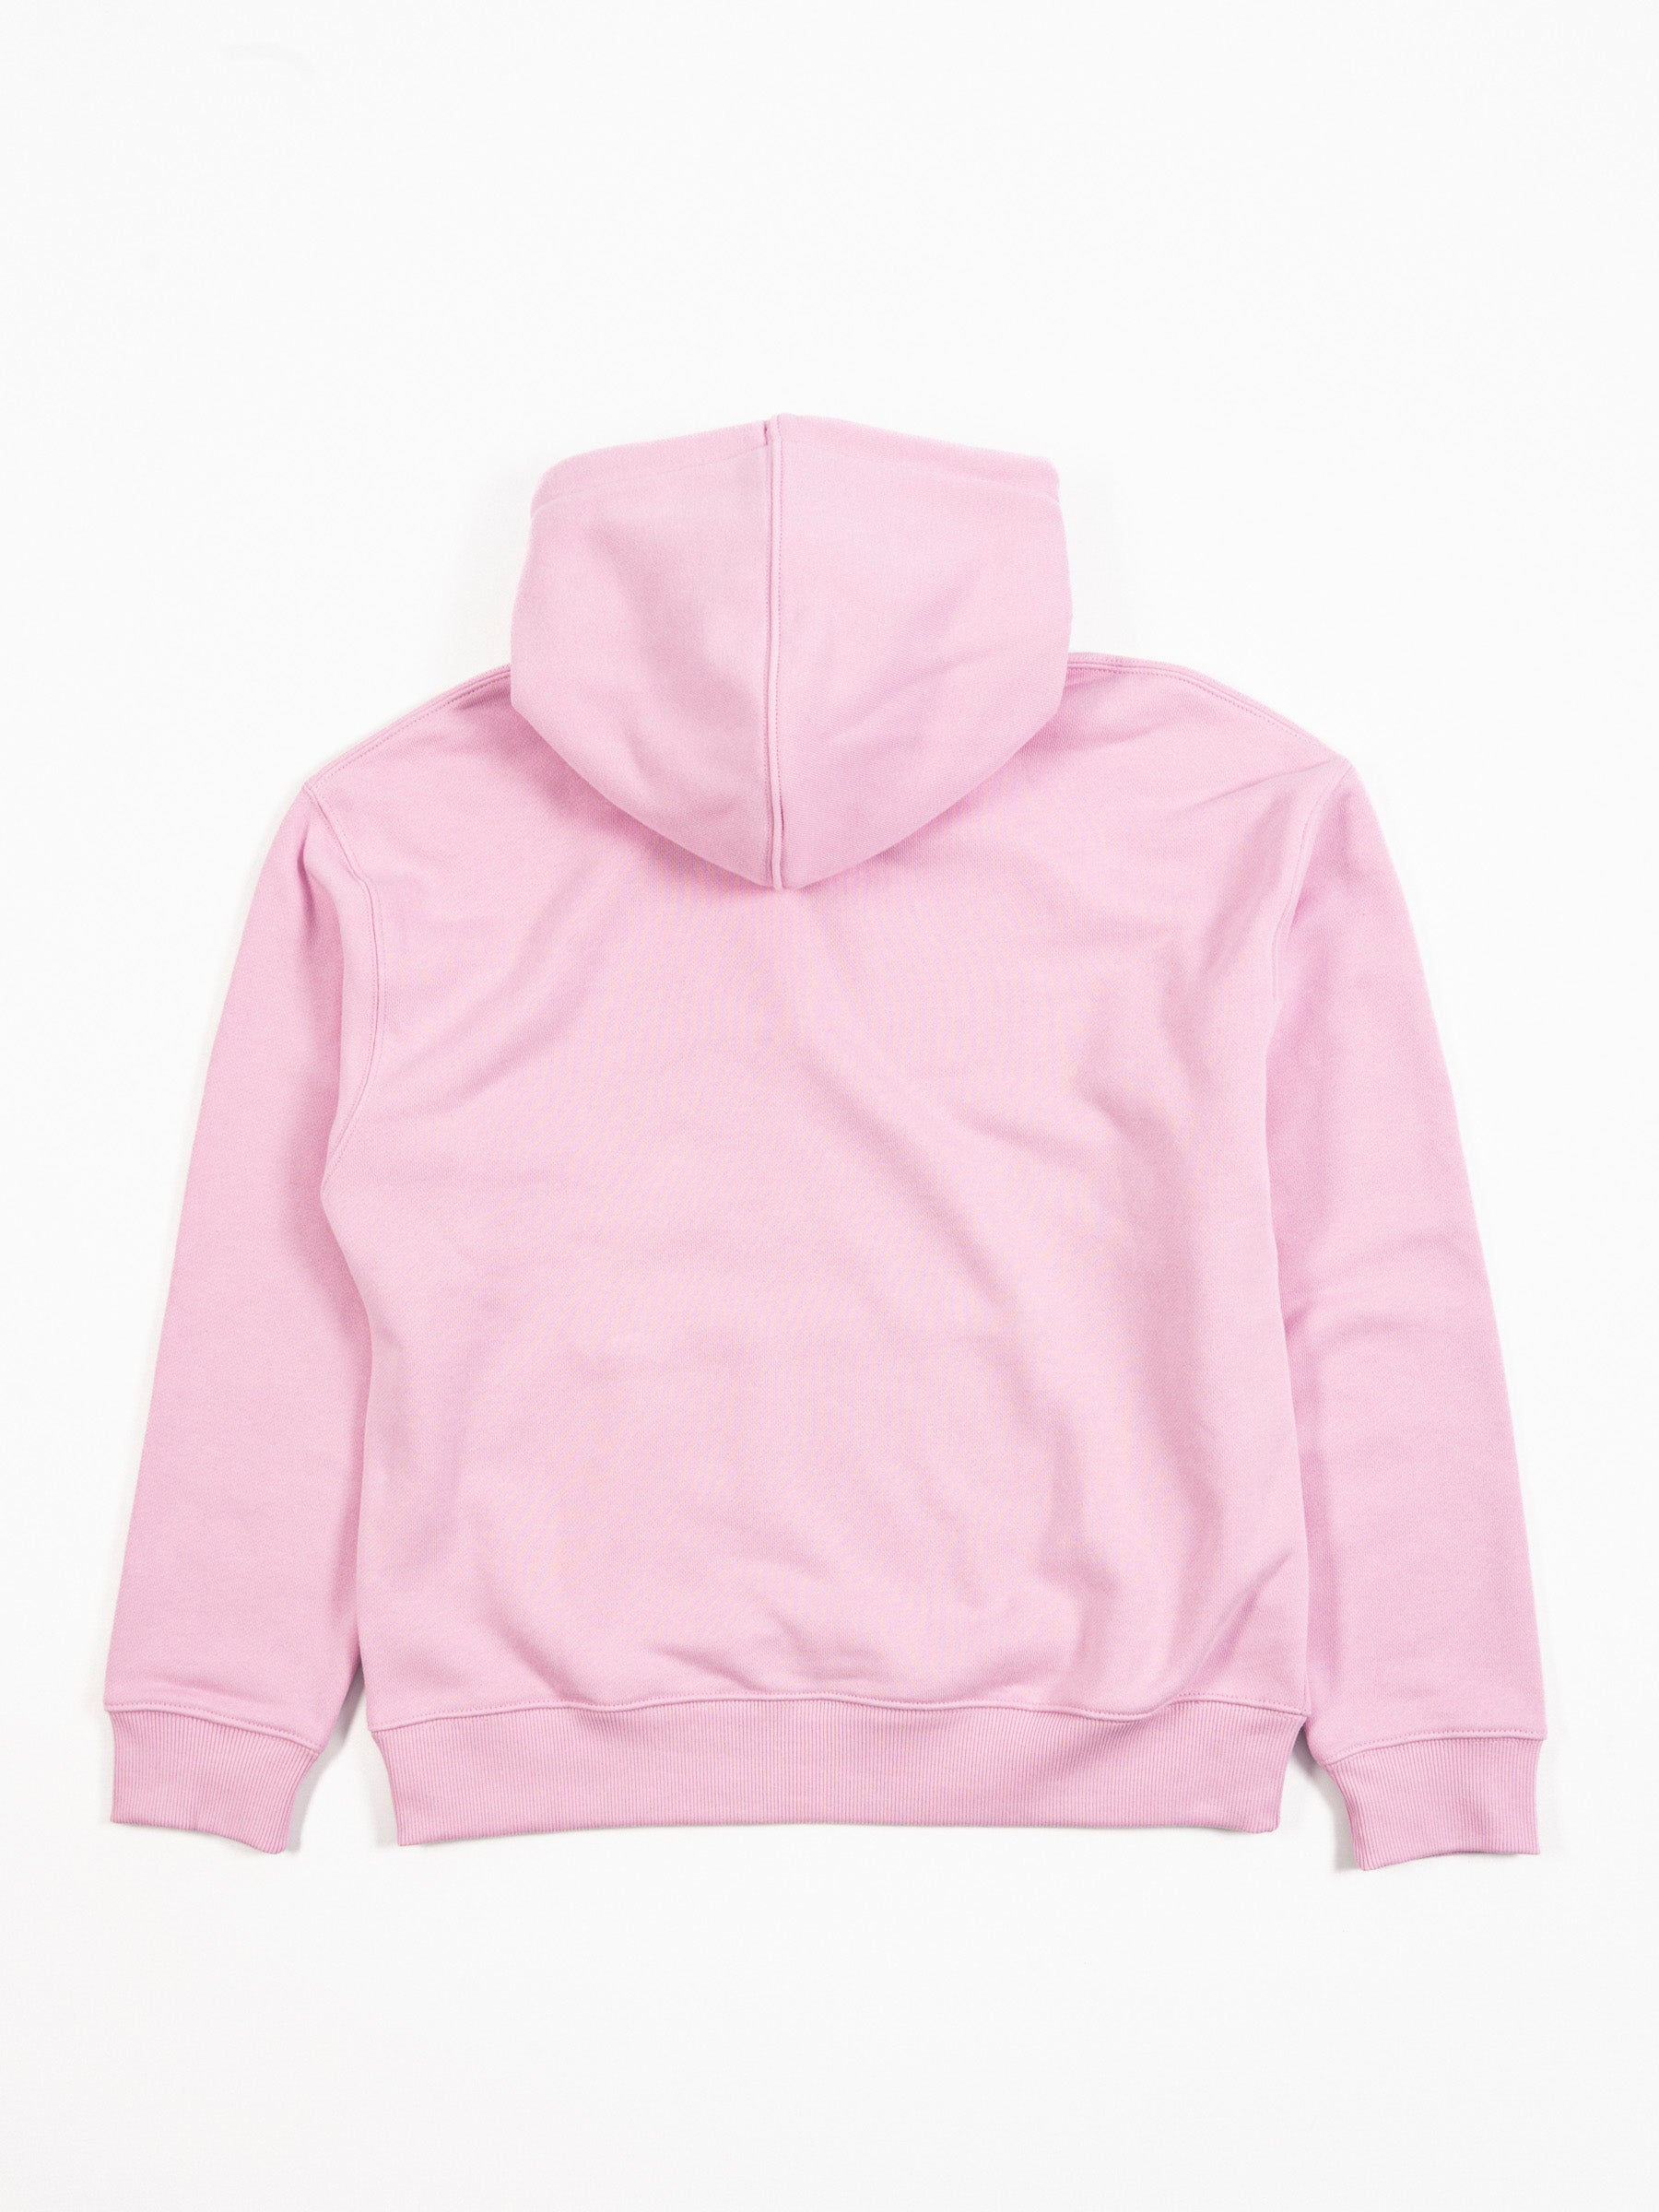 Unisex Loose Fit Hooded Sweater Pink